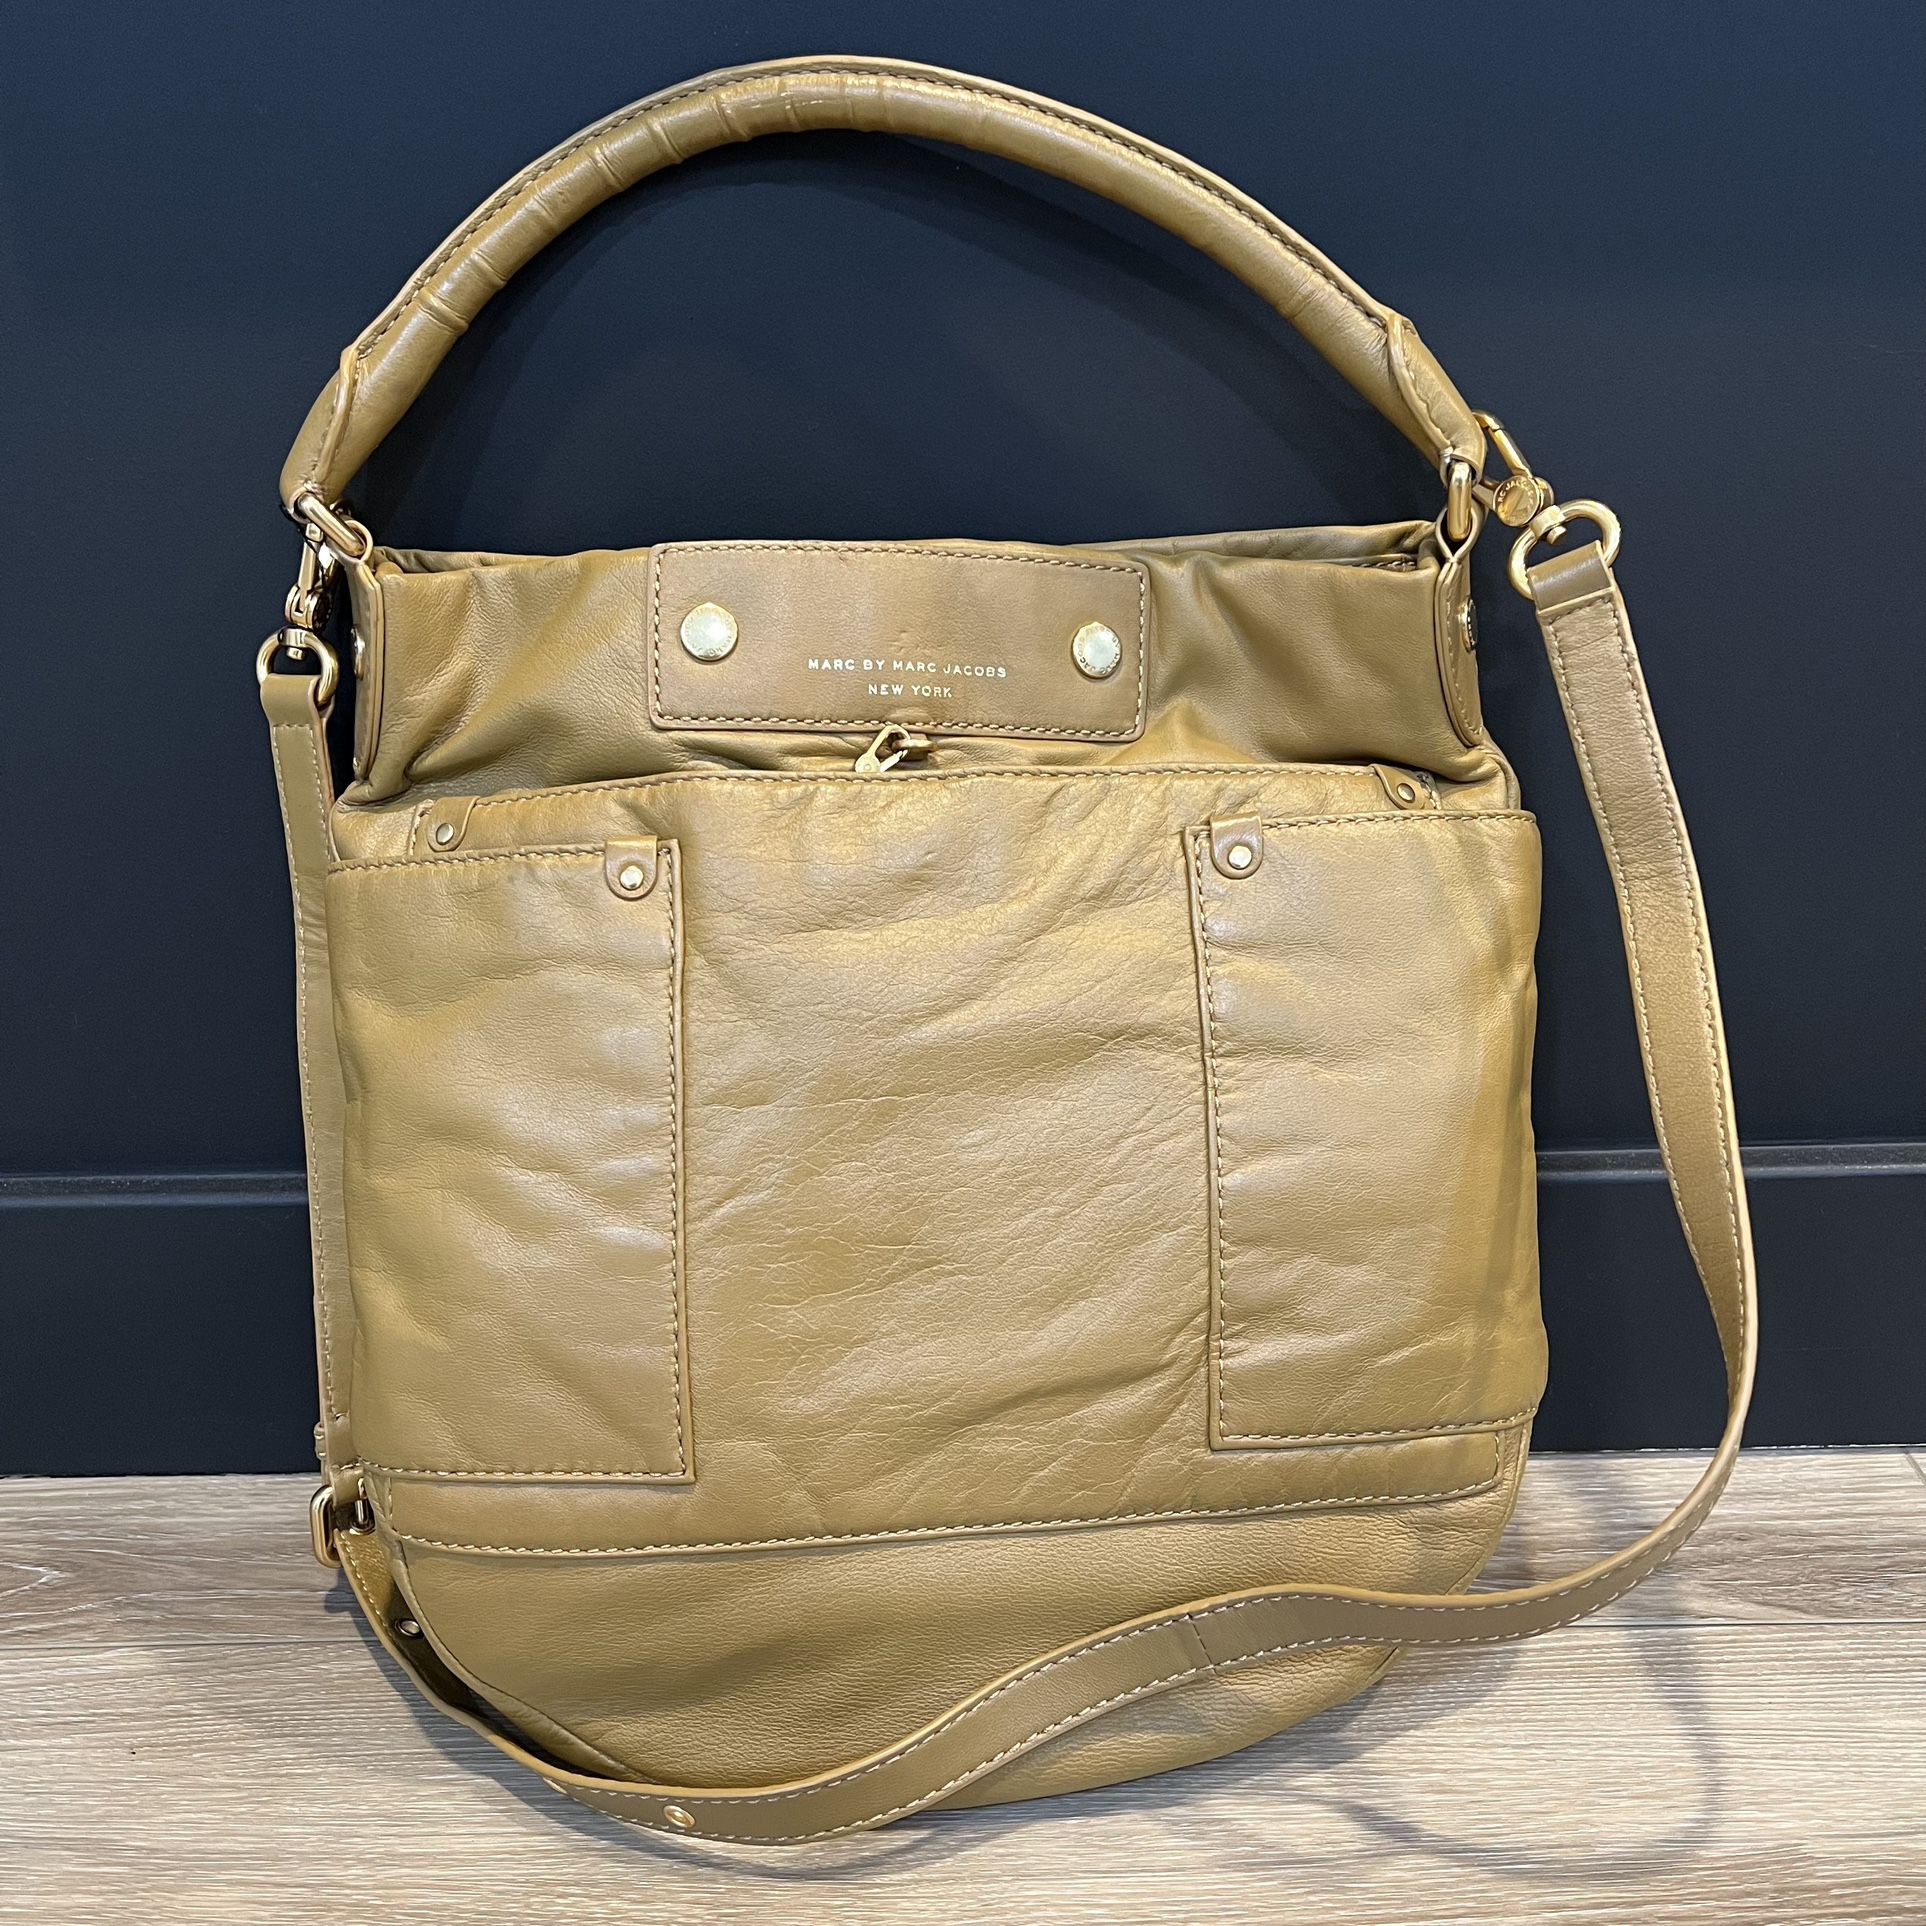 MARC By MARC JACOBS Classic Q Hillier Leather Hobo Shoulder Bag